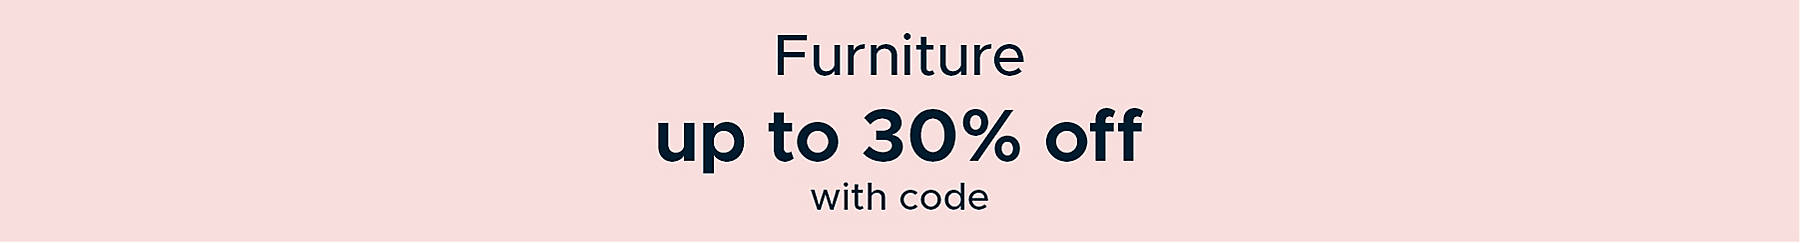 Furniture up to 30% off with code